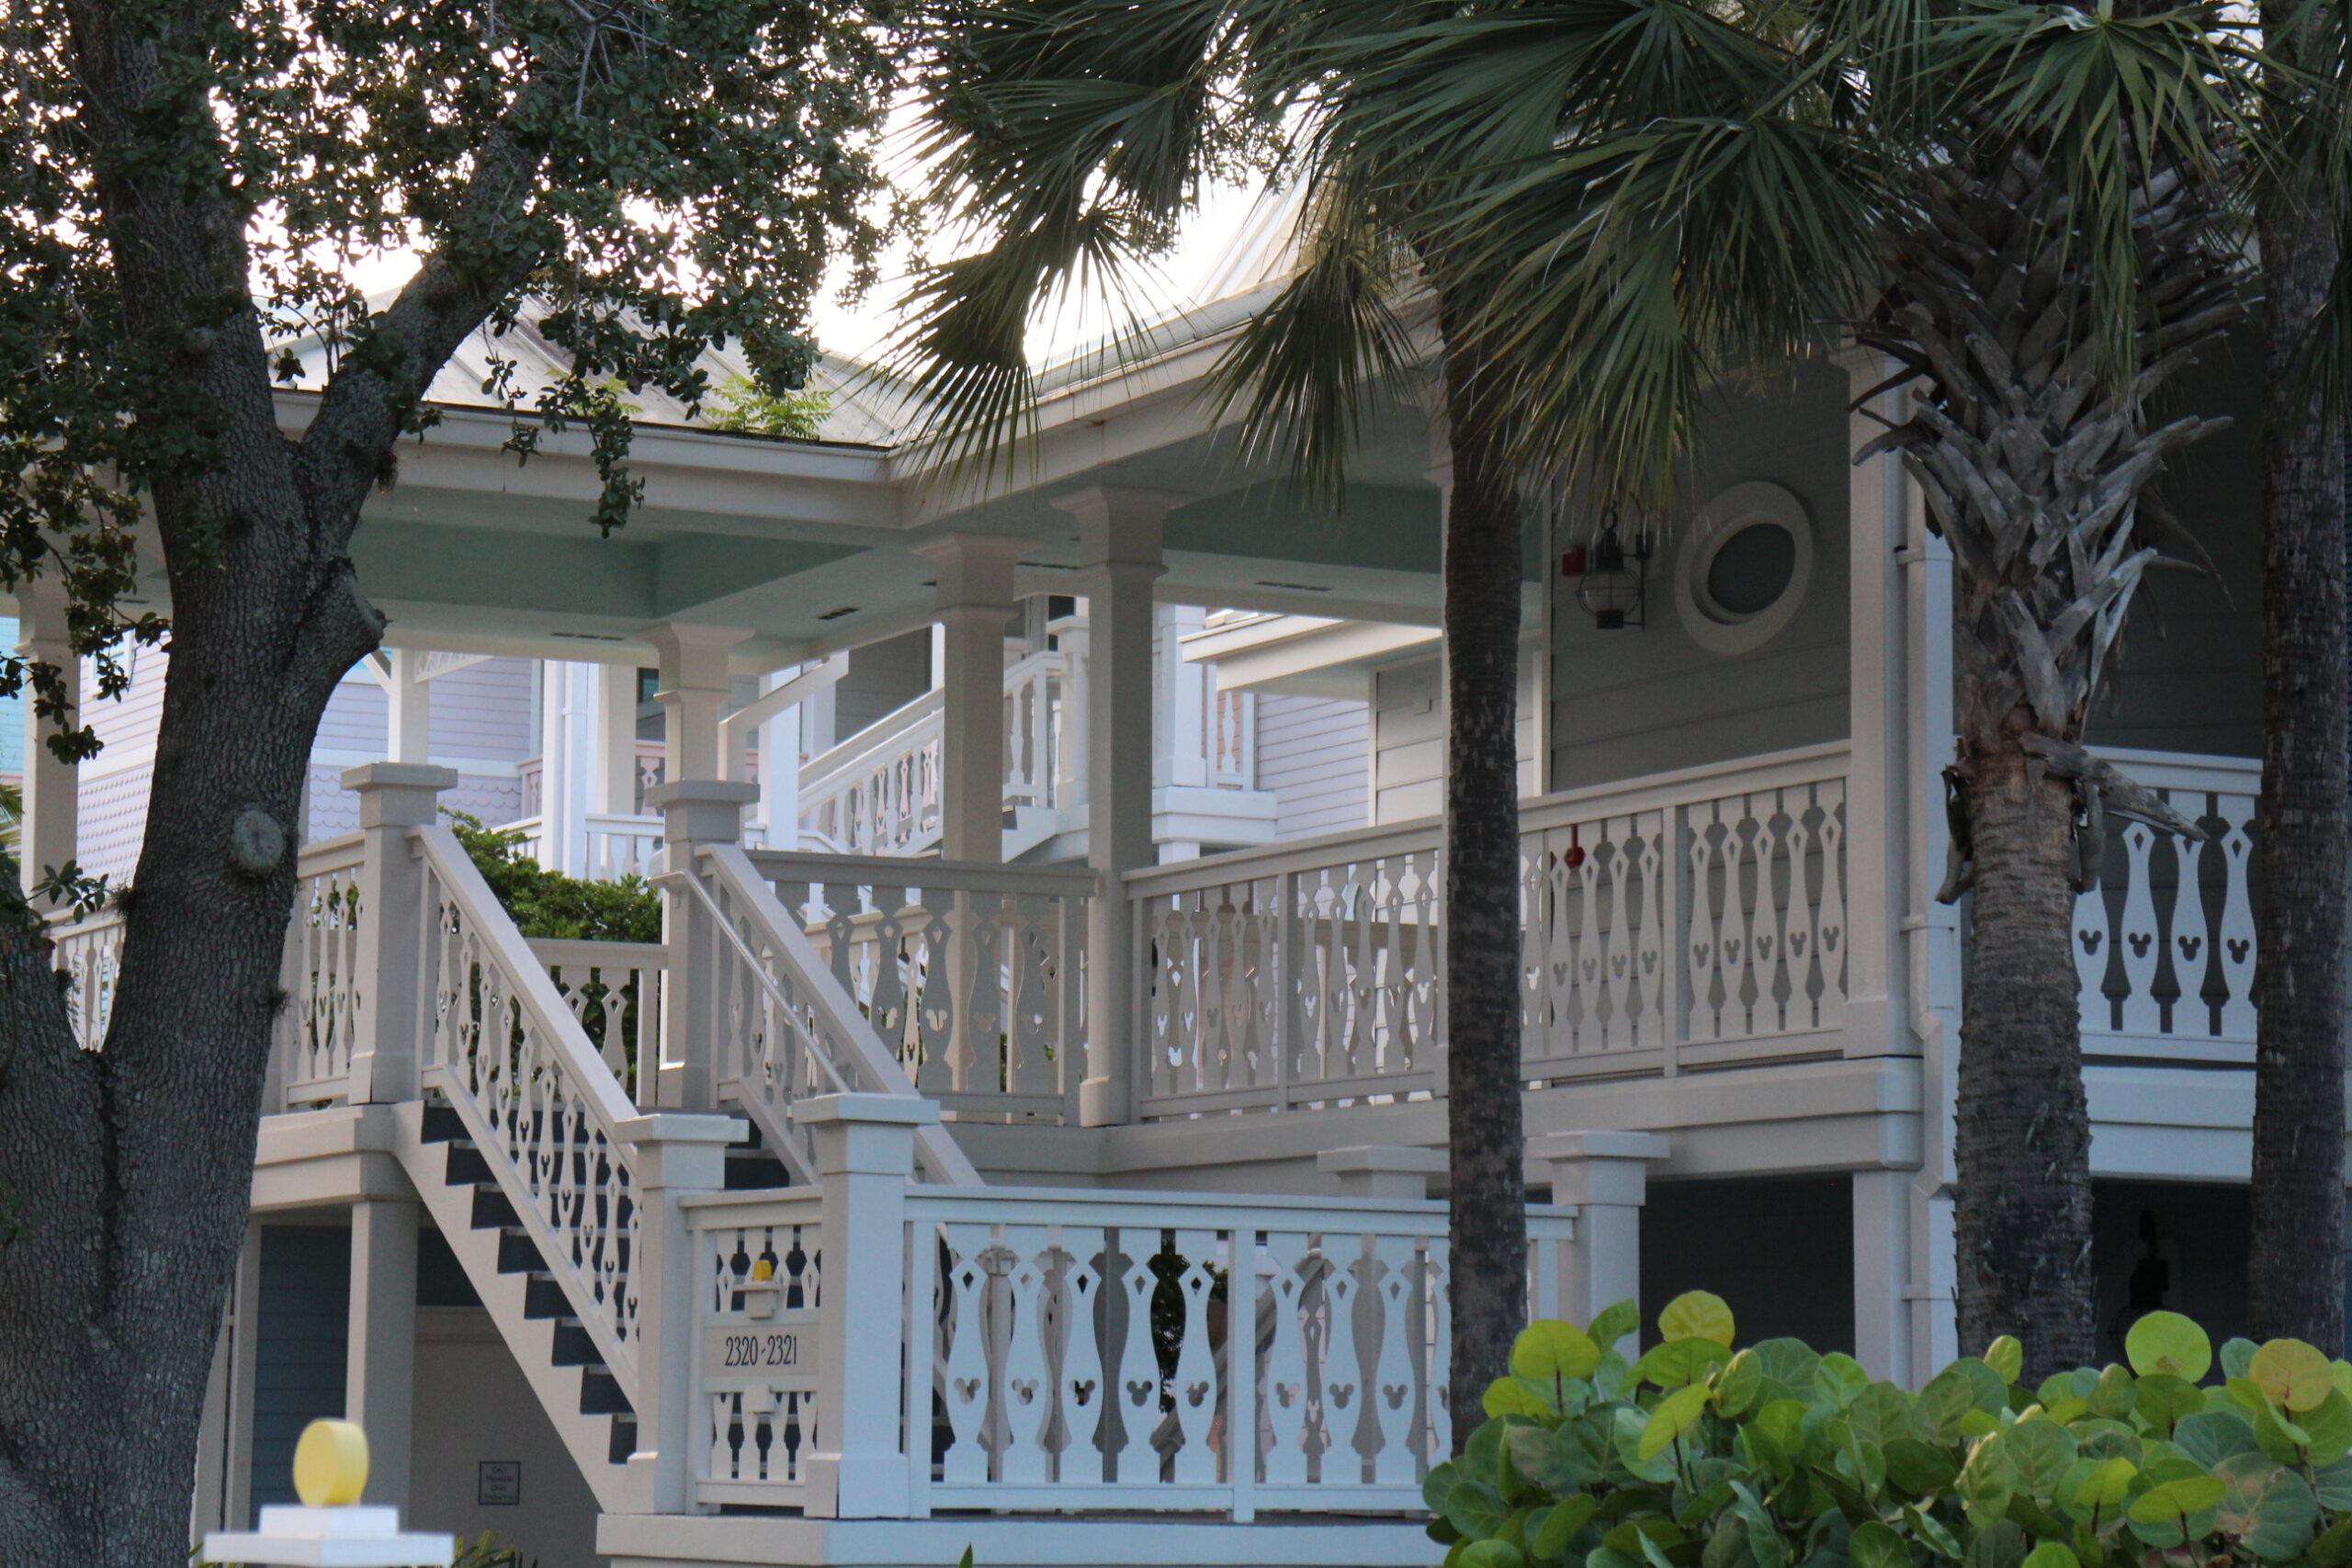 White staircases with Mickey cutouts in the railings at Old Key West resort that lead to DVC villas.